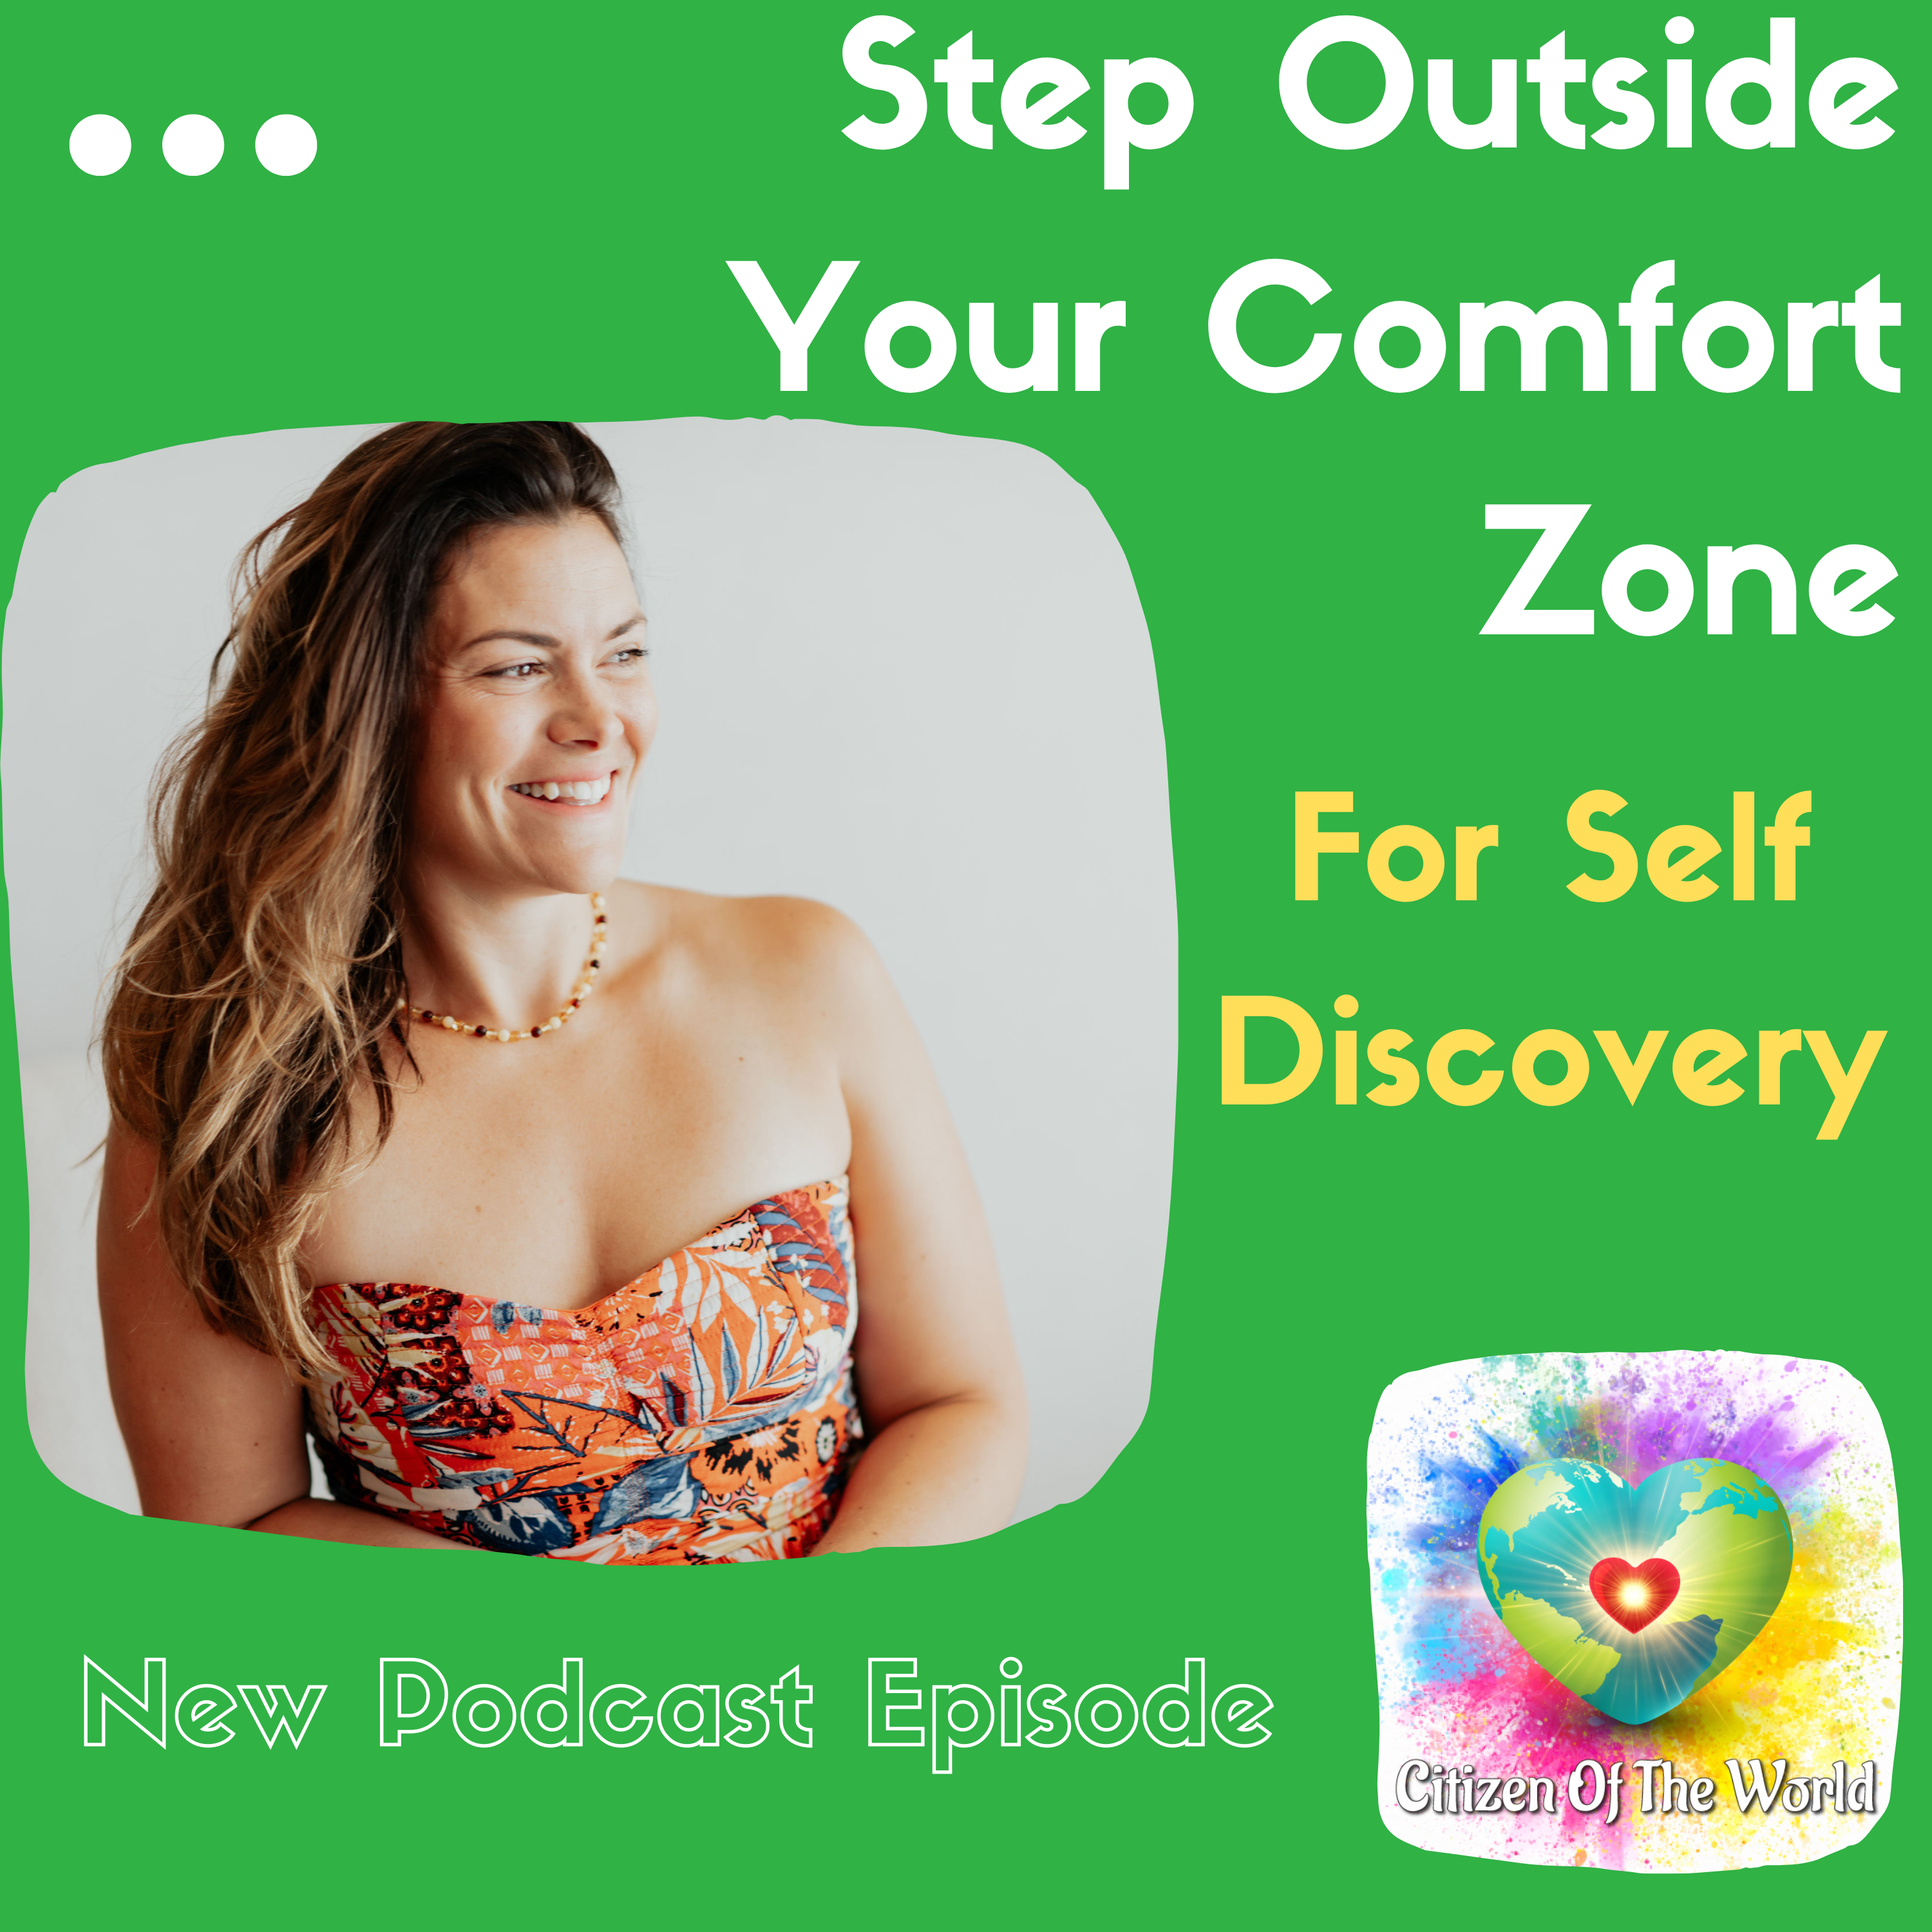 Step outside your comfort zone for self-discovery